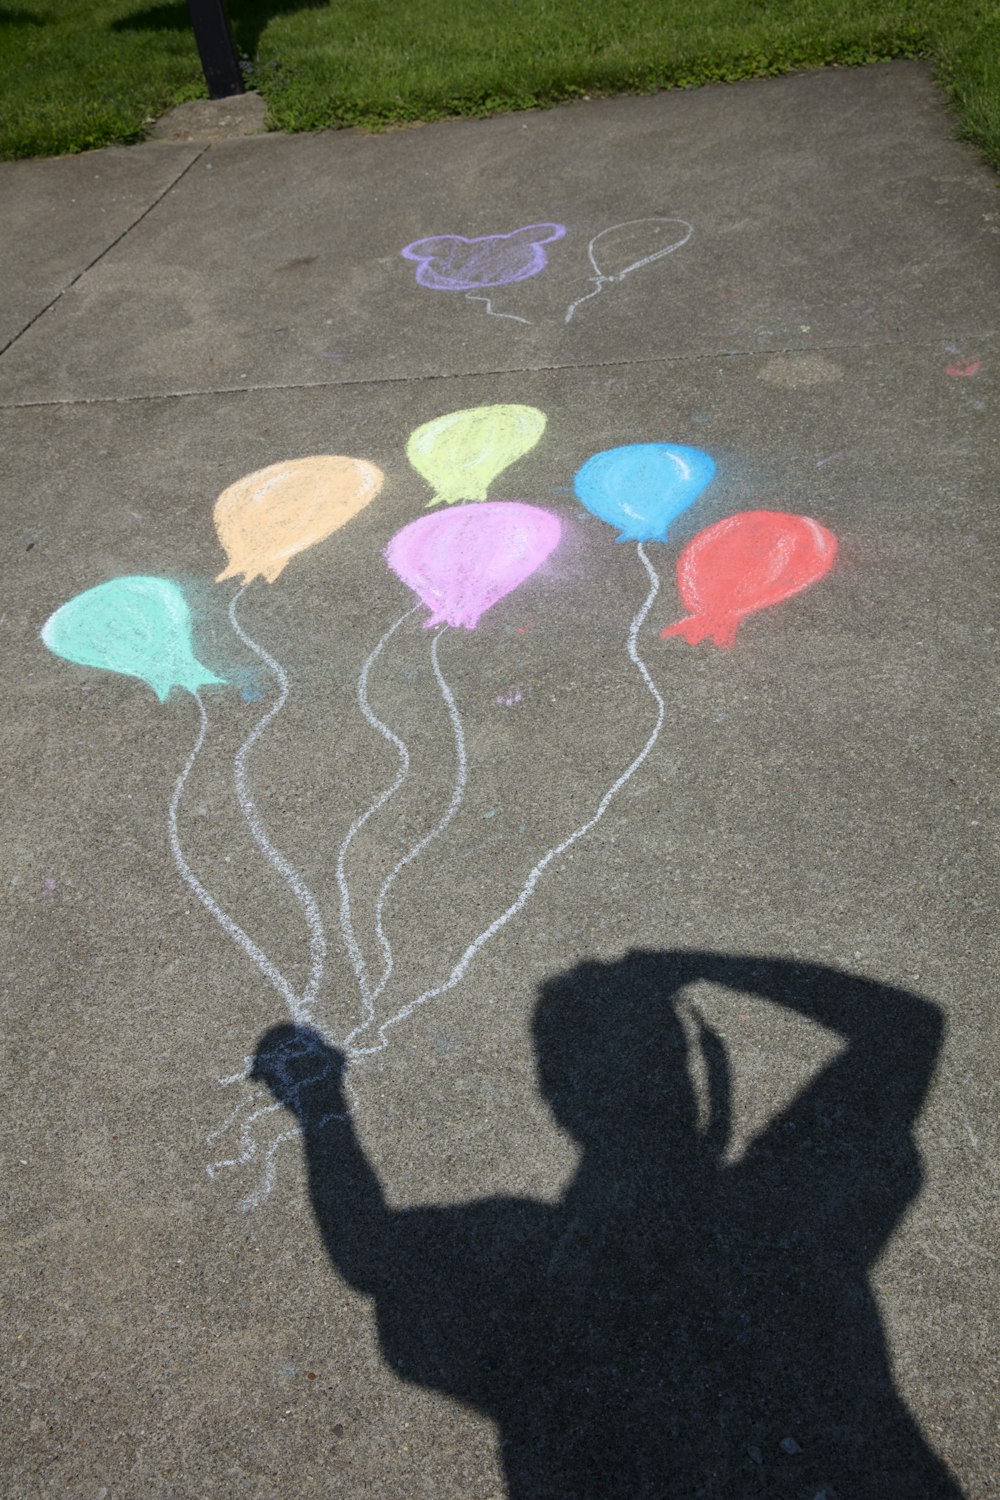 person's shadow holding bundle of balloons chalk art on concrete ground